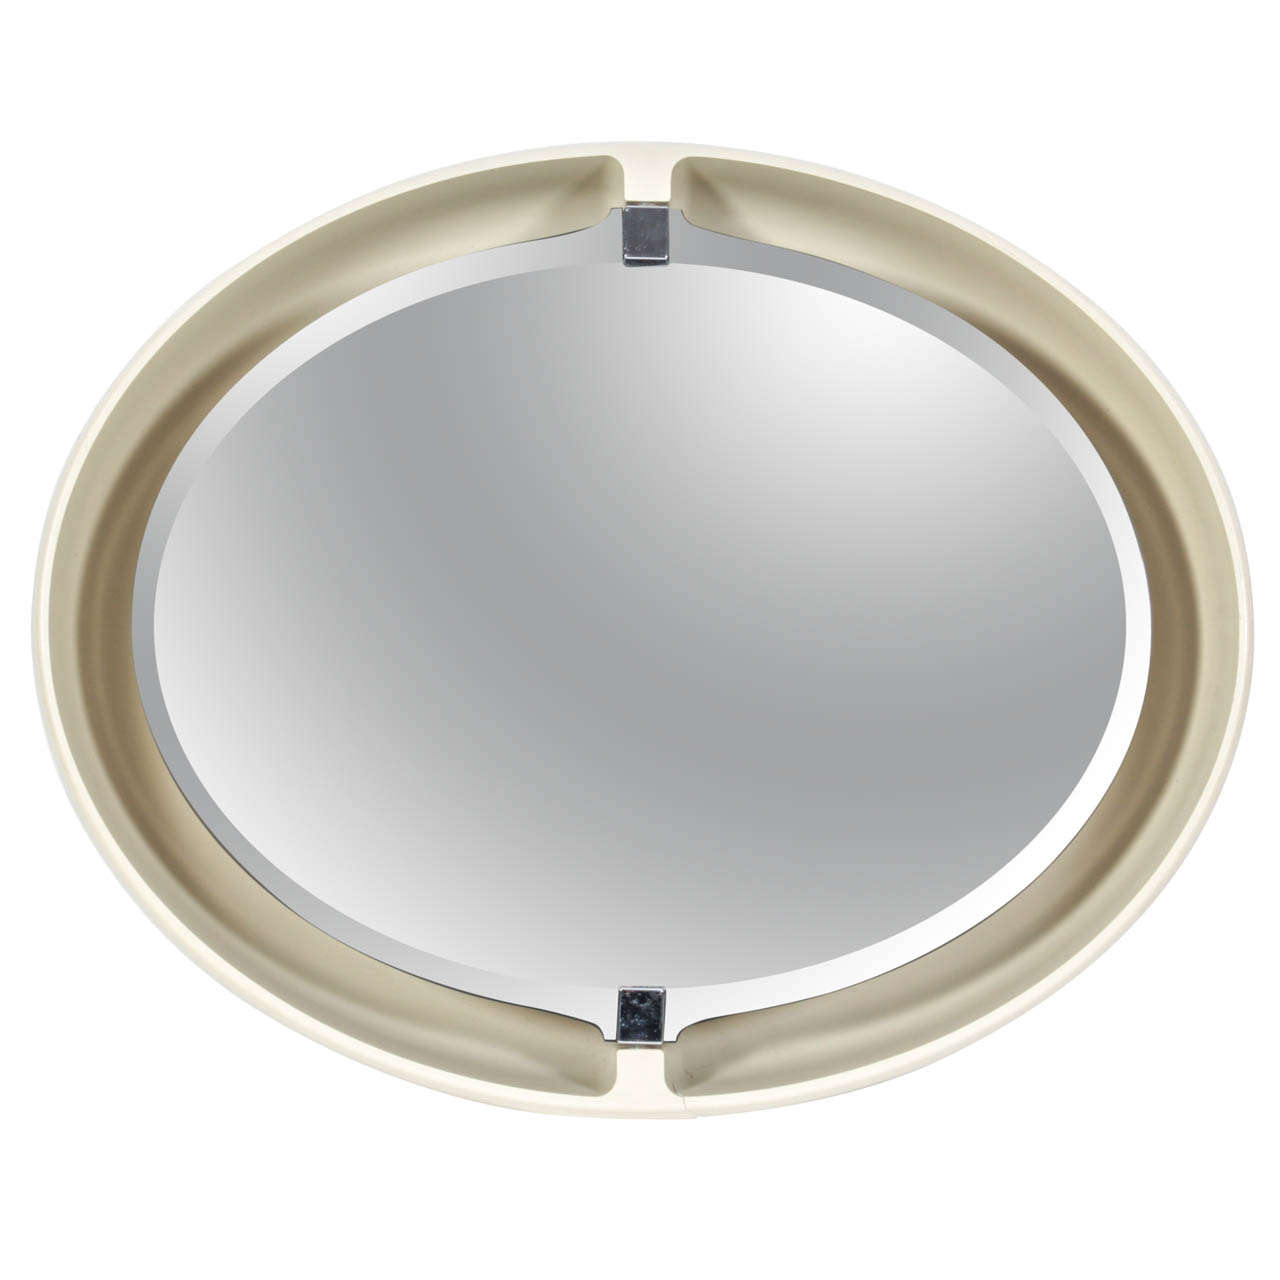 1970s Allibert French Pivoting & Lighted Oval Mirror For Sale